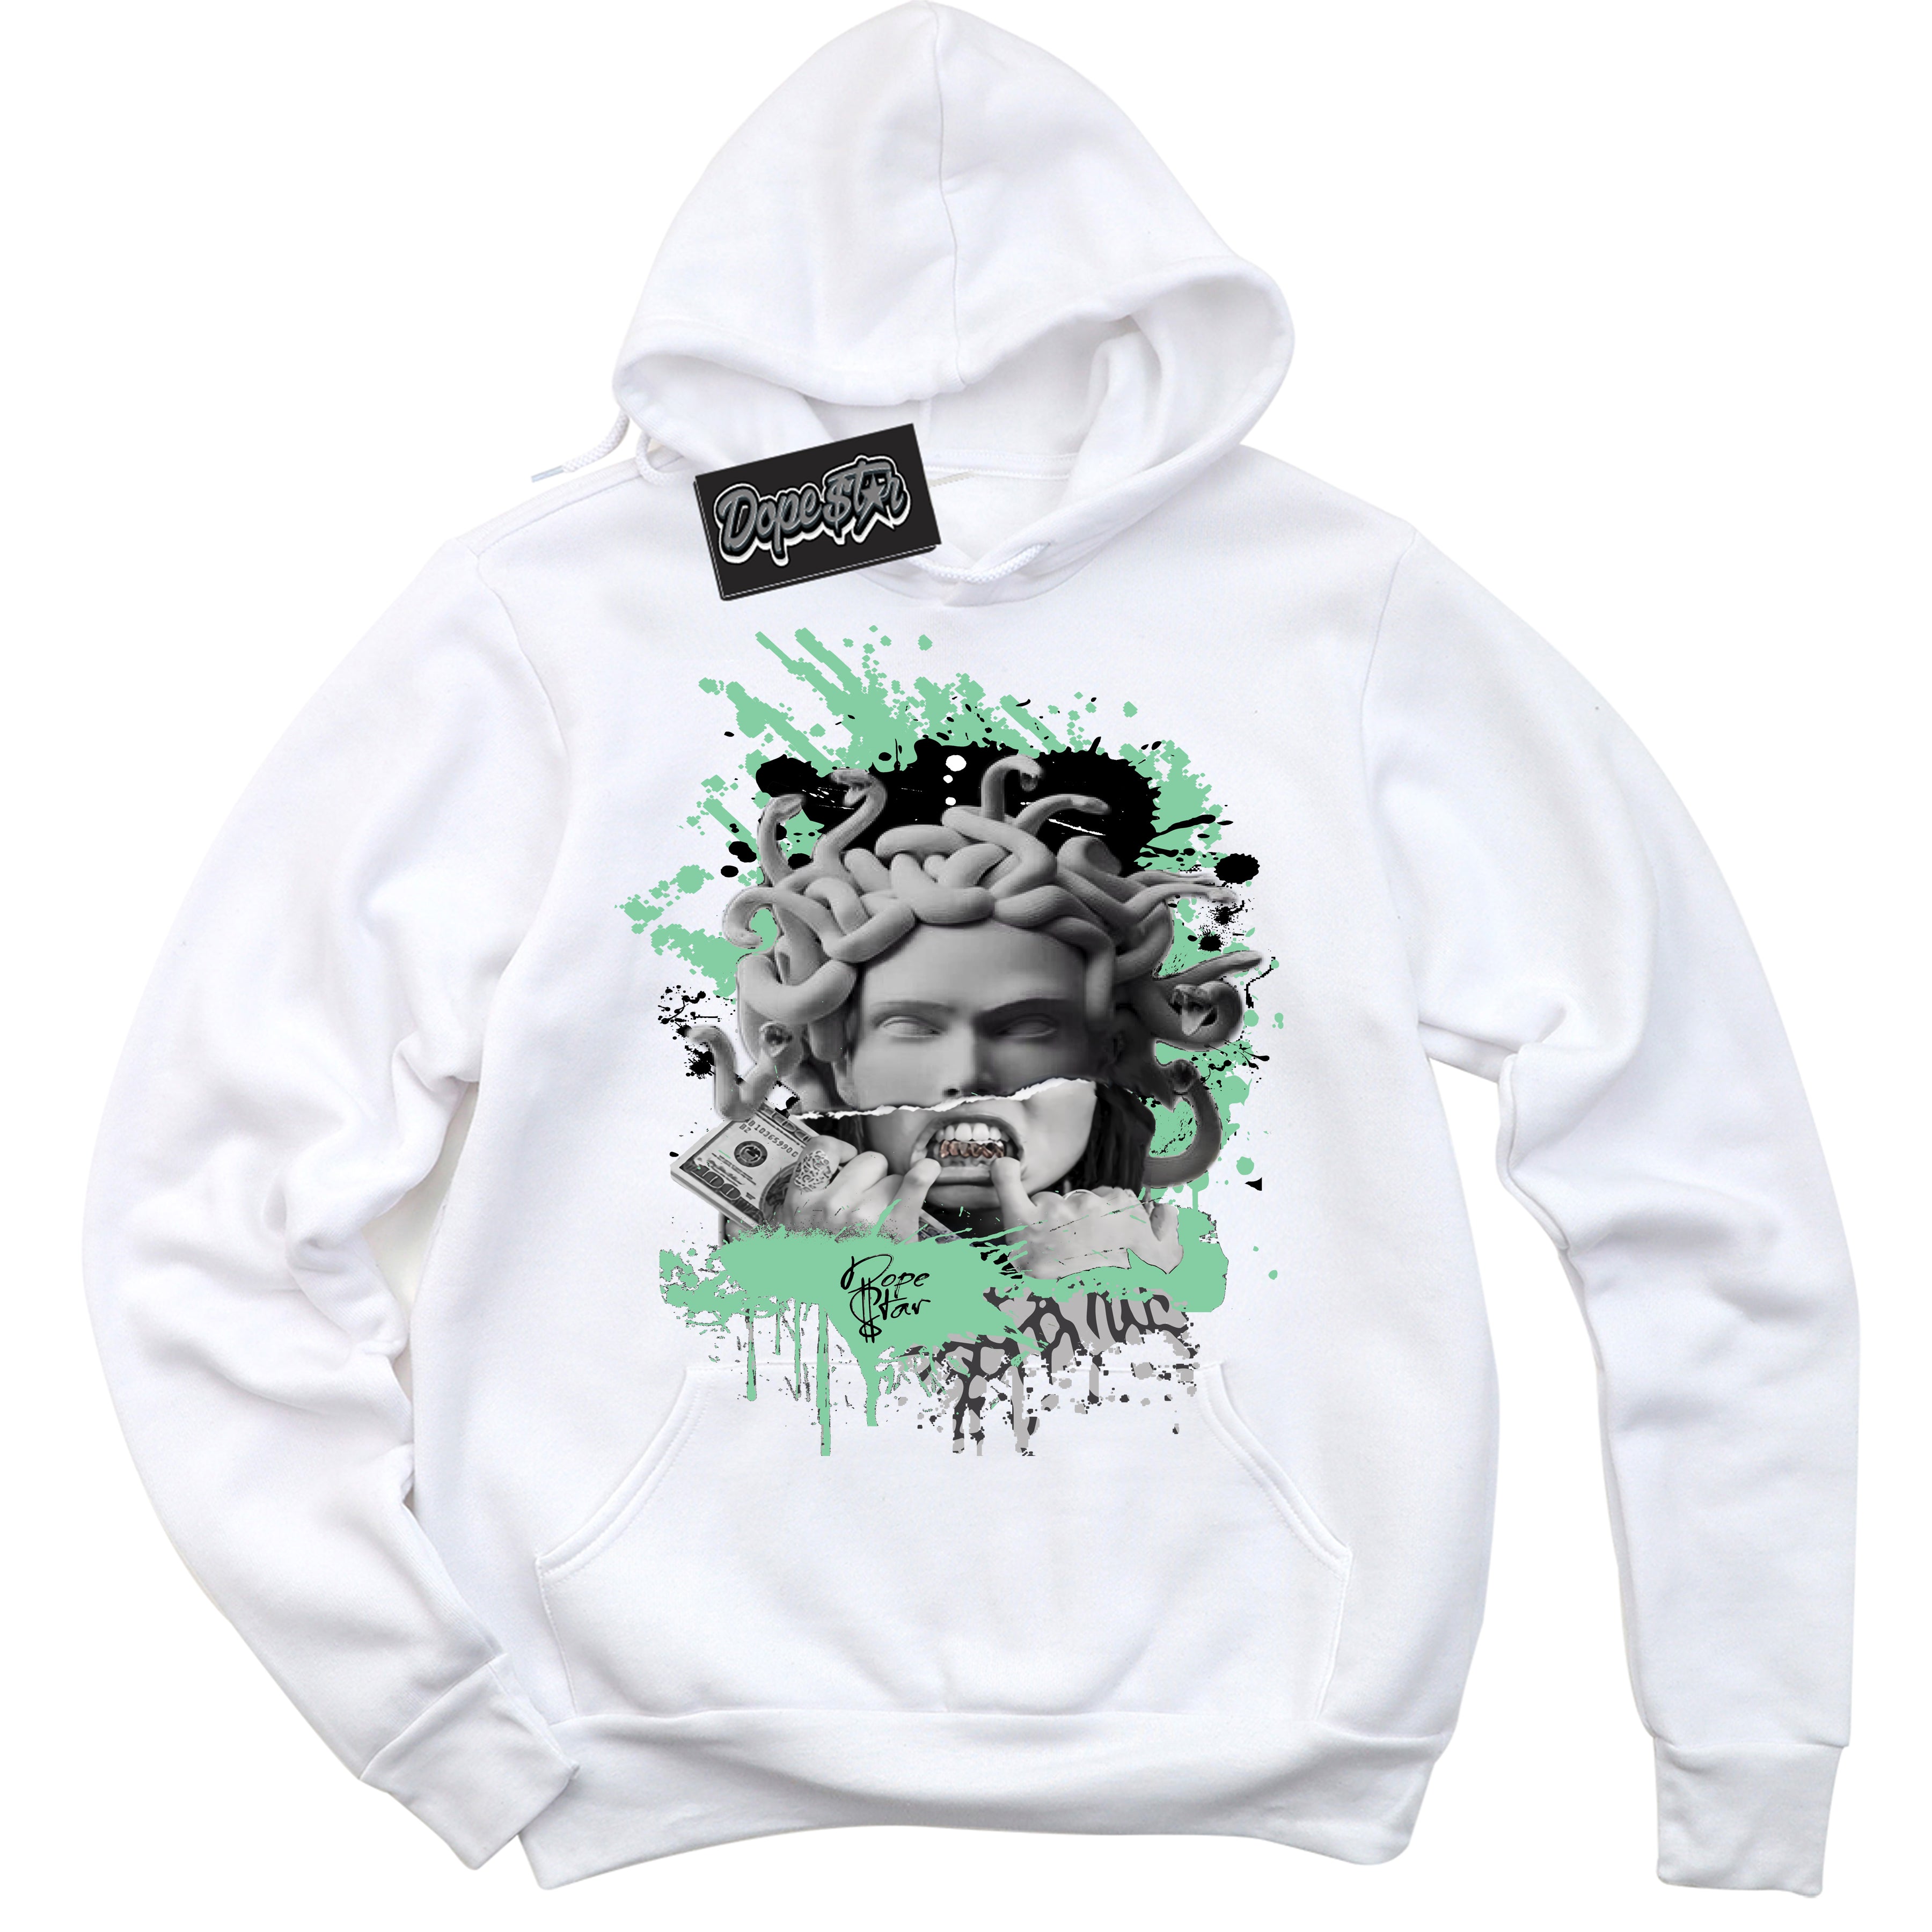 Cool White Graphic DopeStar Hoodie with “ Medusa “ print, that perfectly matches Green Glow 3s sneakers